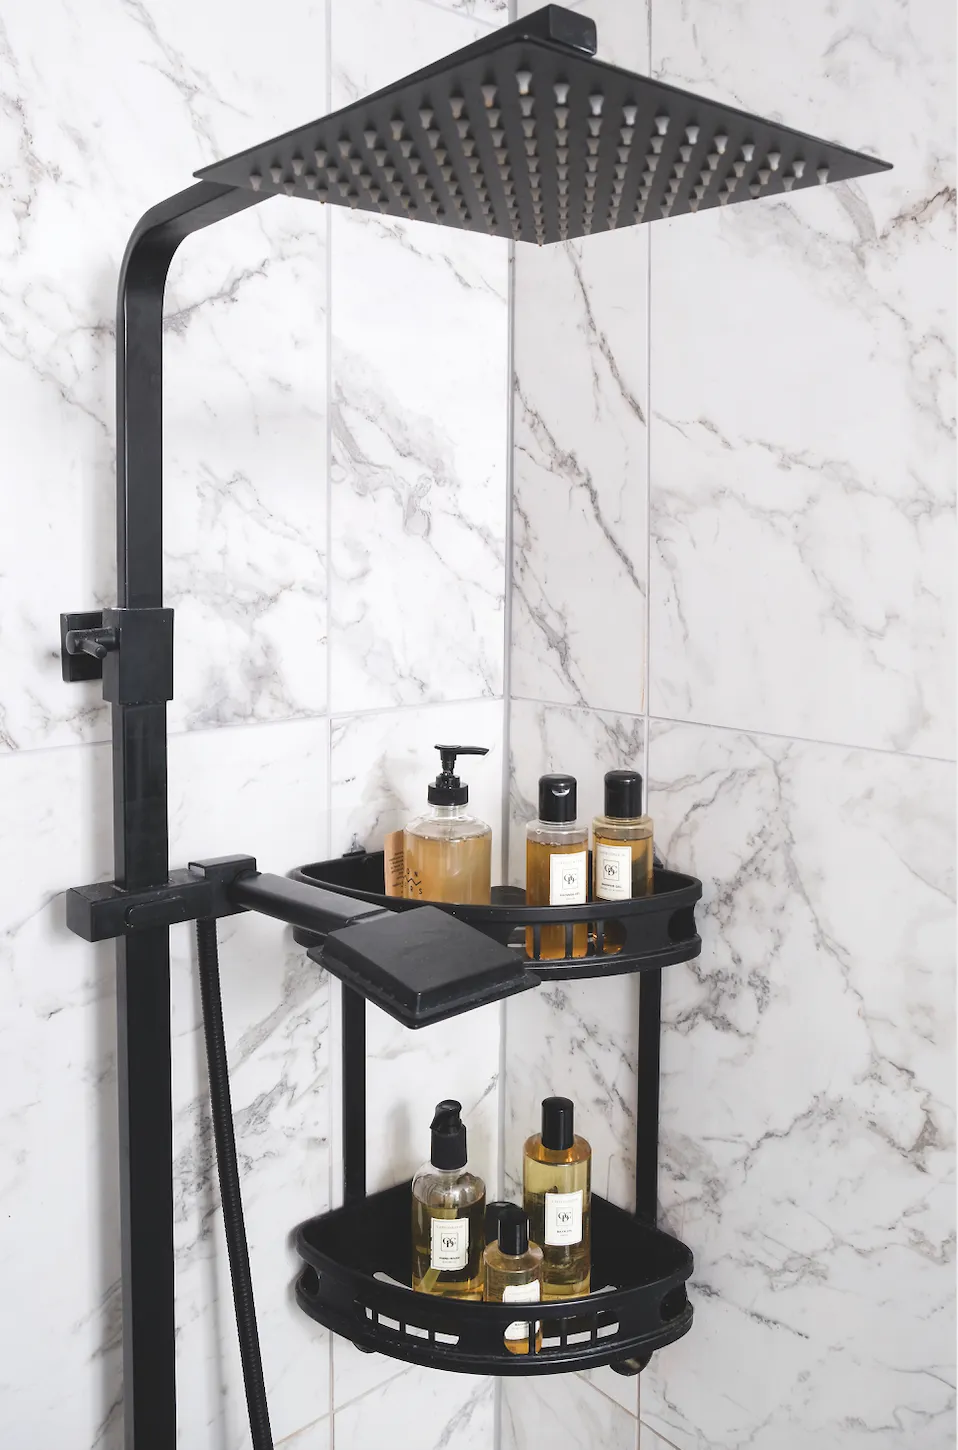 A compact bathroom needs savvy storage and Sylwia found a stylish solution in this two- tiered caddy, which fits neatly into the corner of the shower